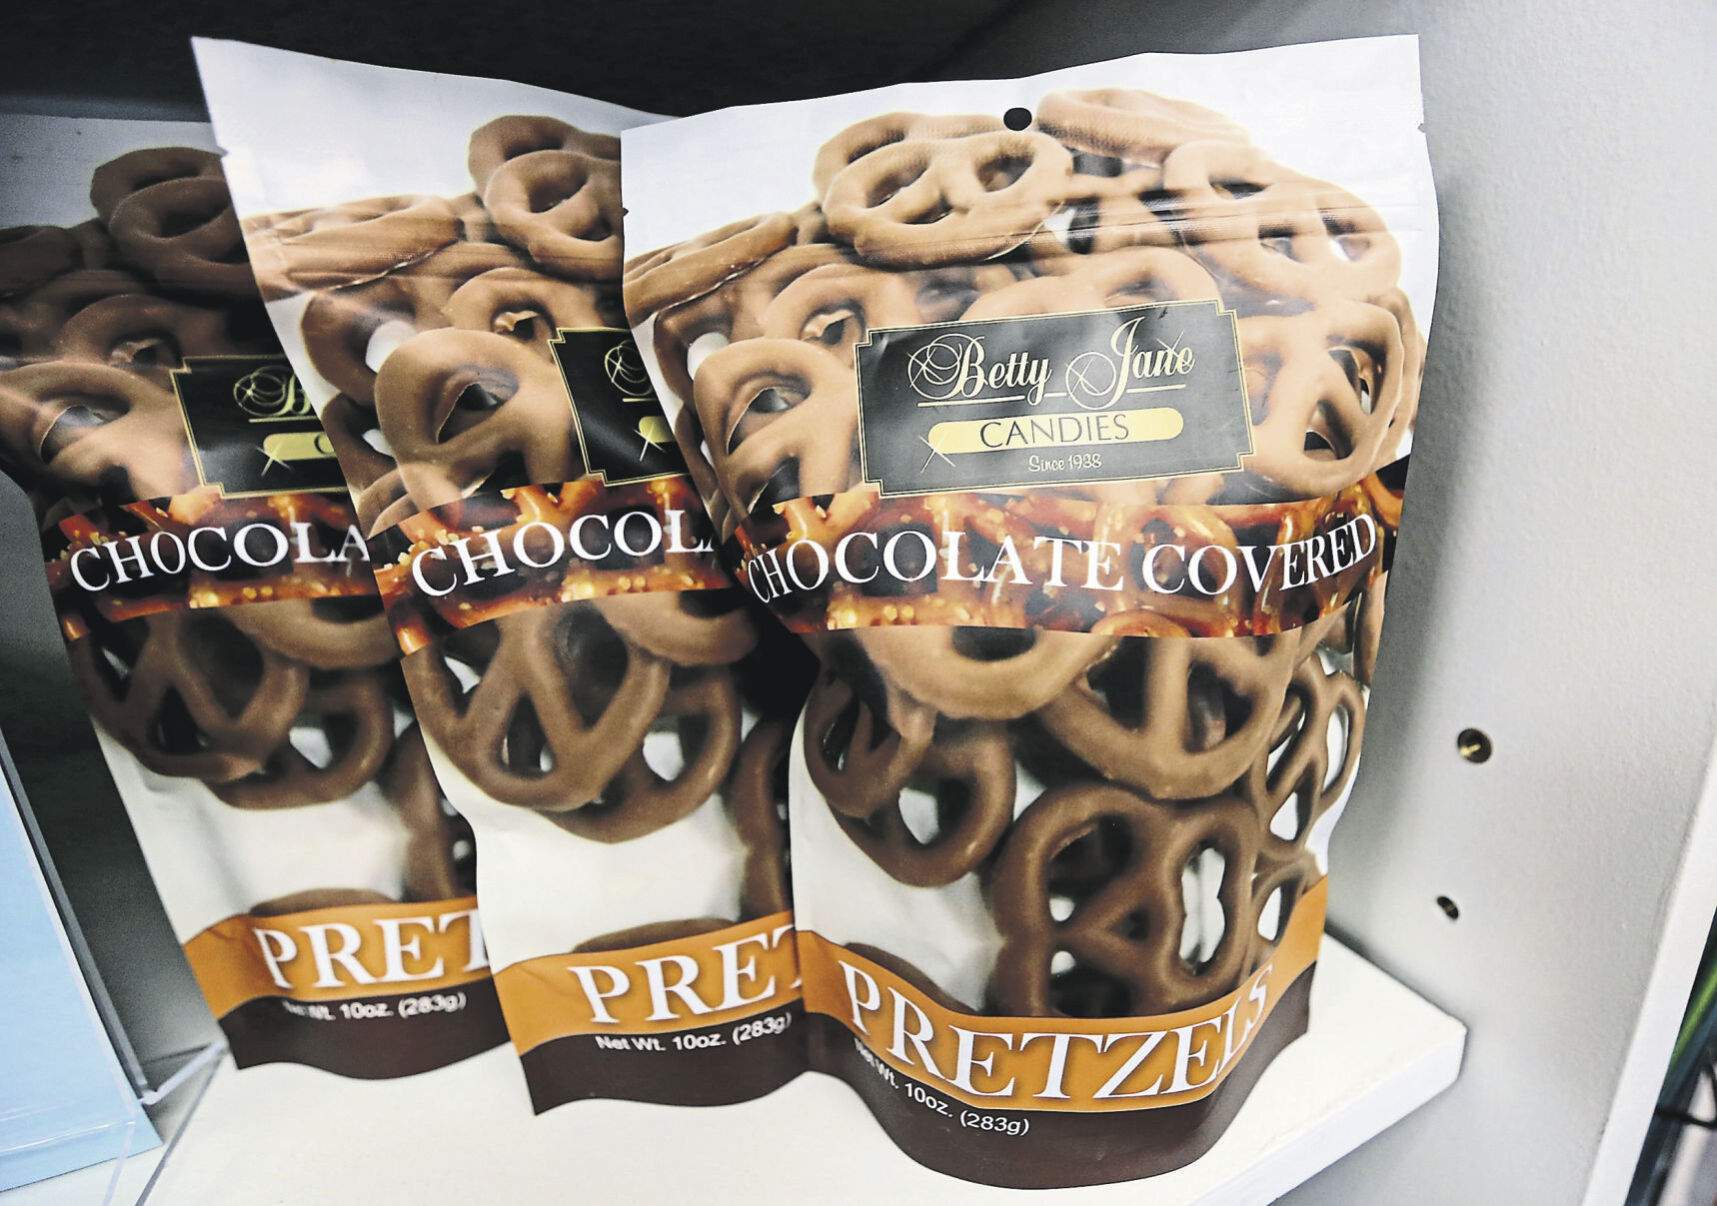 Chocolate covered pretzels at Betty Jane Candies in Dubuque.    PHOTO CREDIT: NICKI KOHL